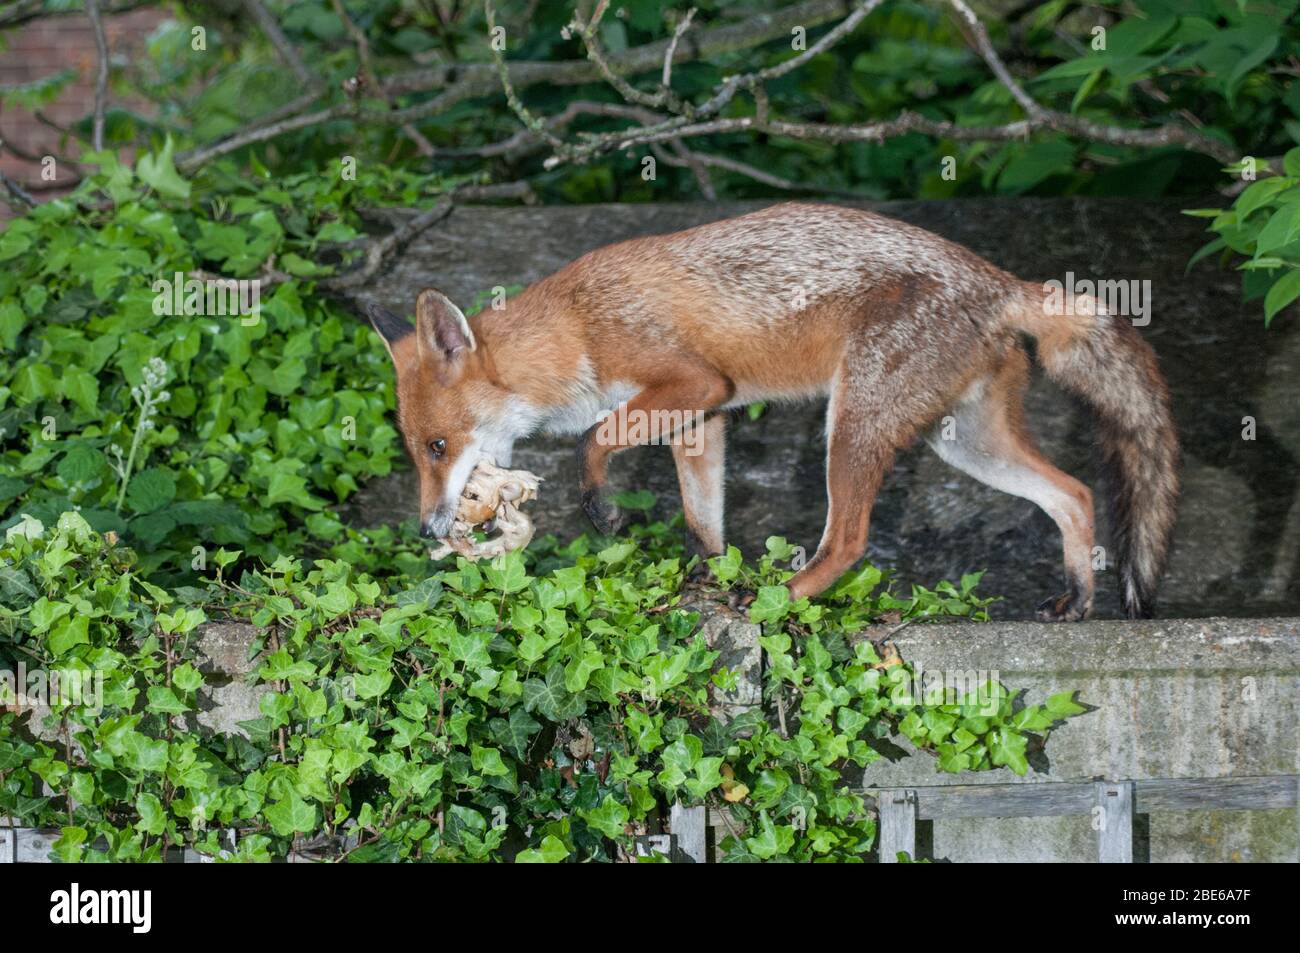 Red Fox, Vulpes vulpes, scavenging for food scraps in a garden, London, United Kingdom Stock Photo